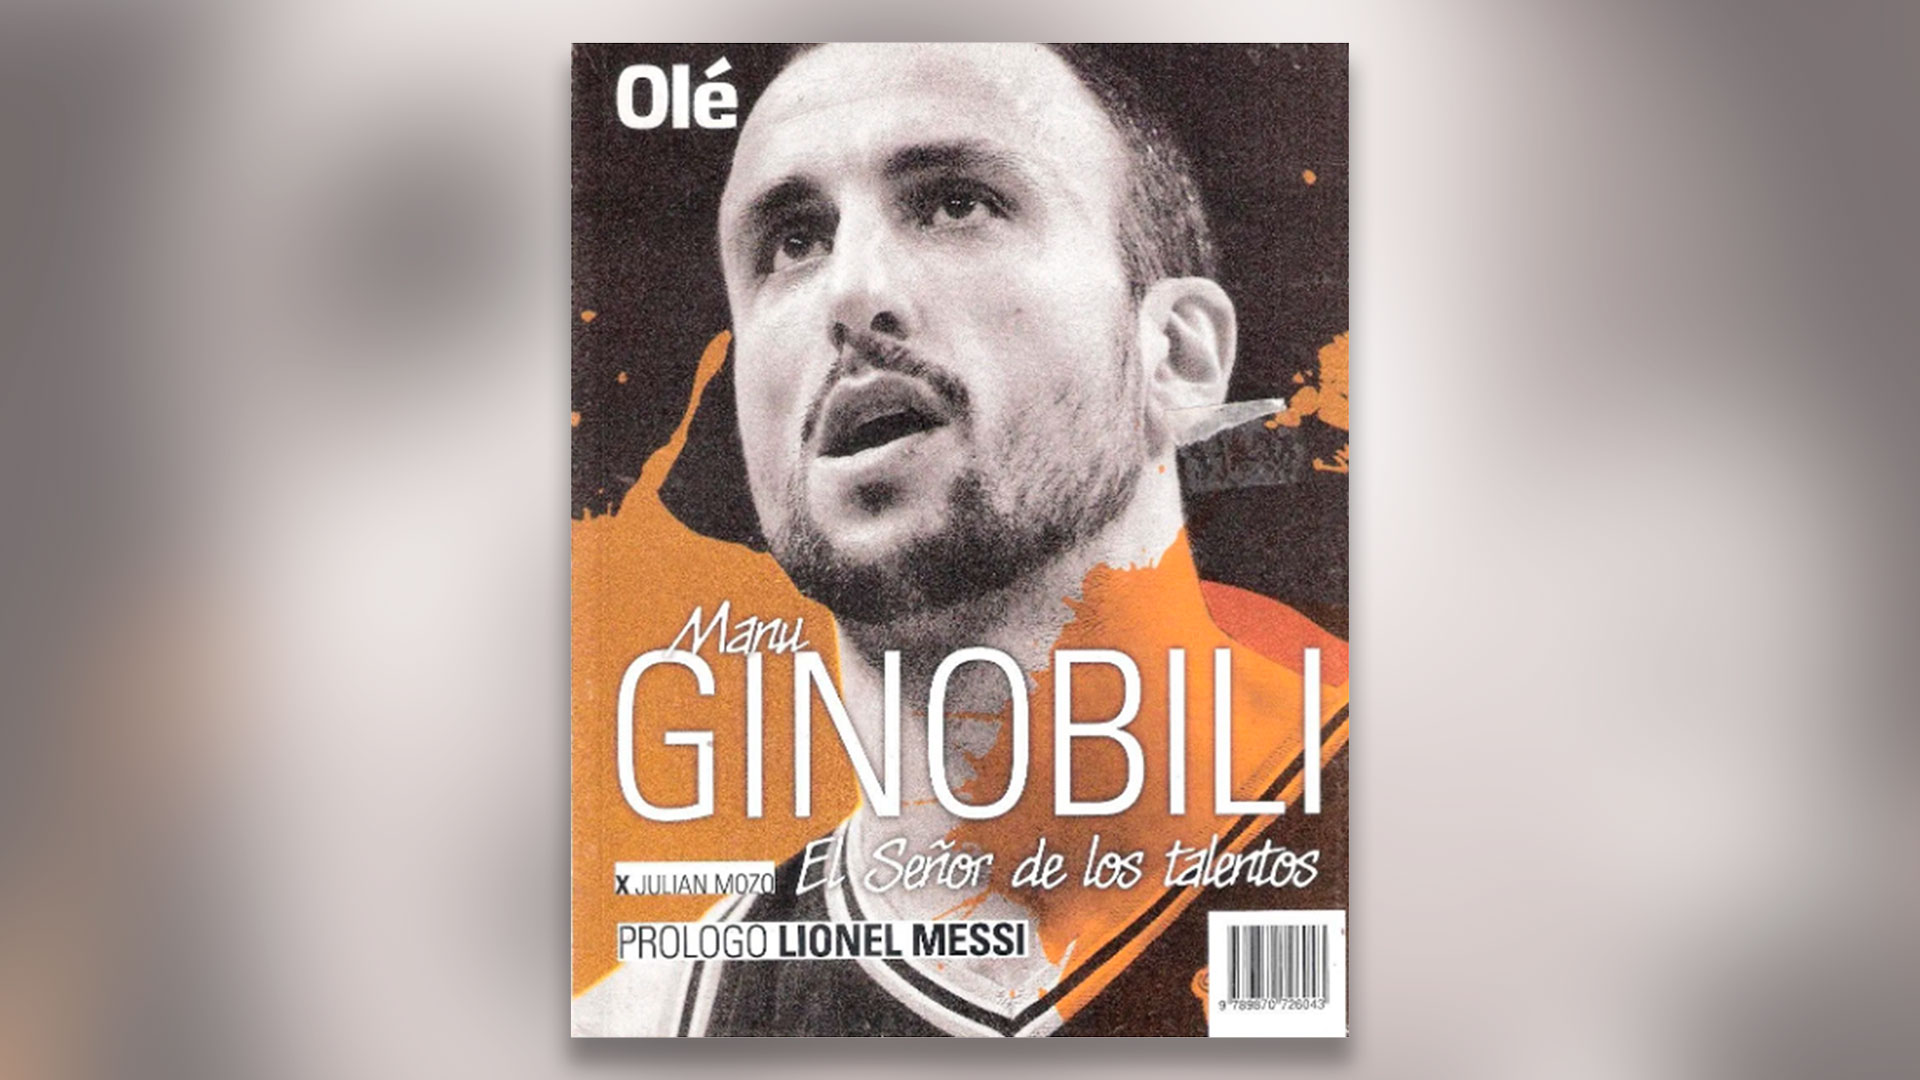 Manu Ginobili.  The Lord of Talents, by Julián Mozo.